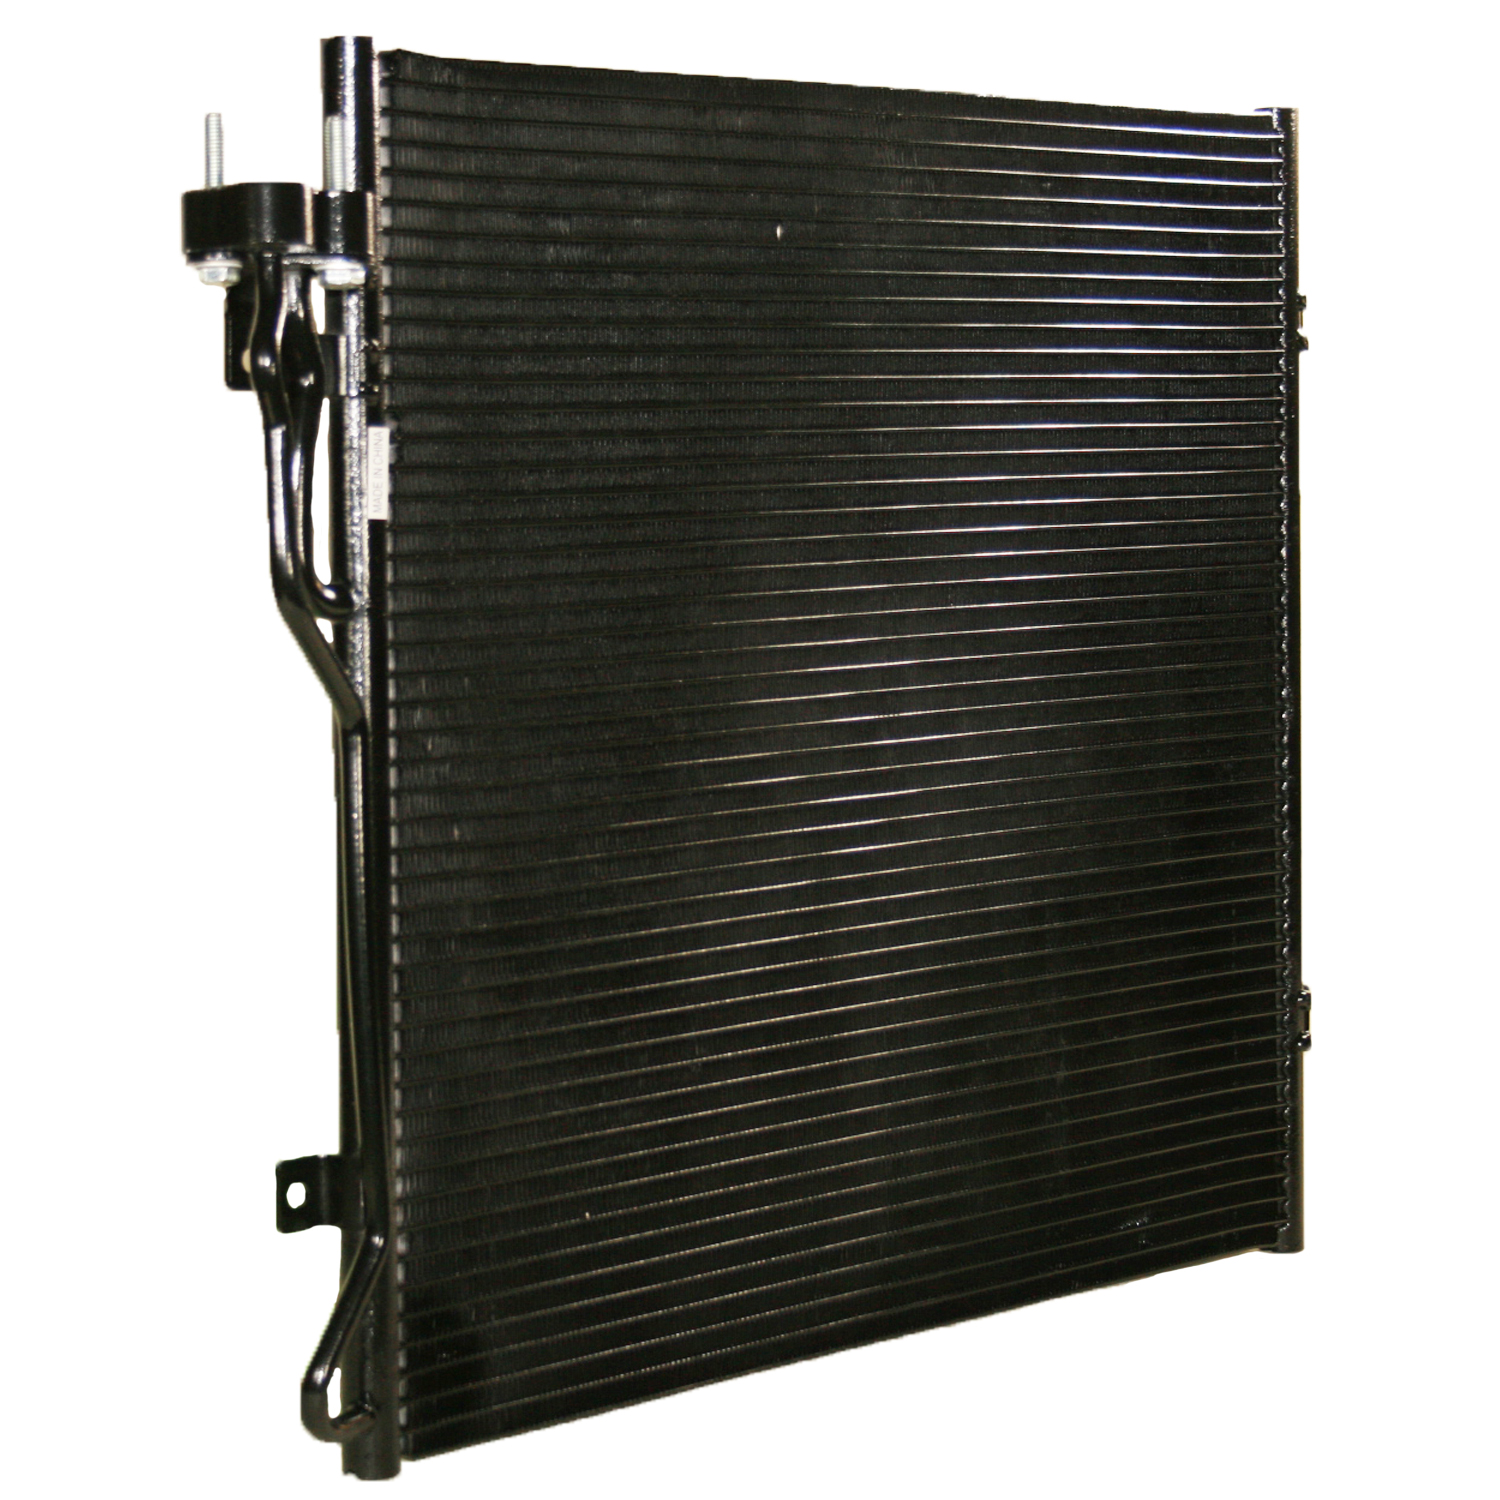 TCW Condenser 44-3058 New Product Image field_60b6a13a6e67c